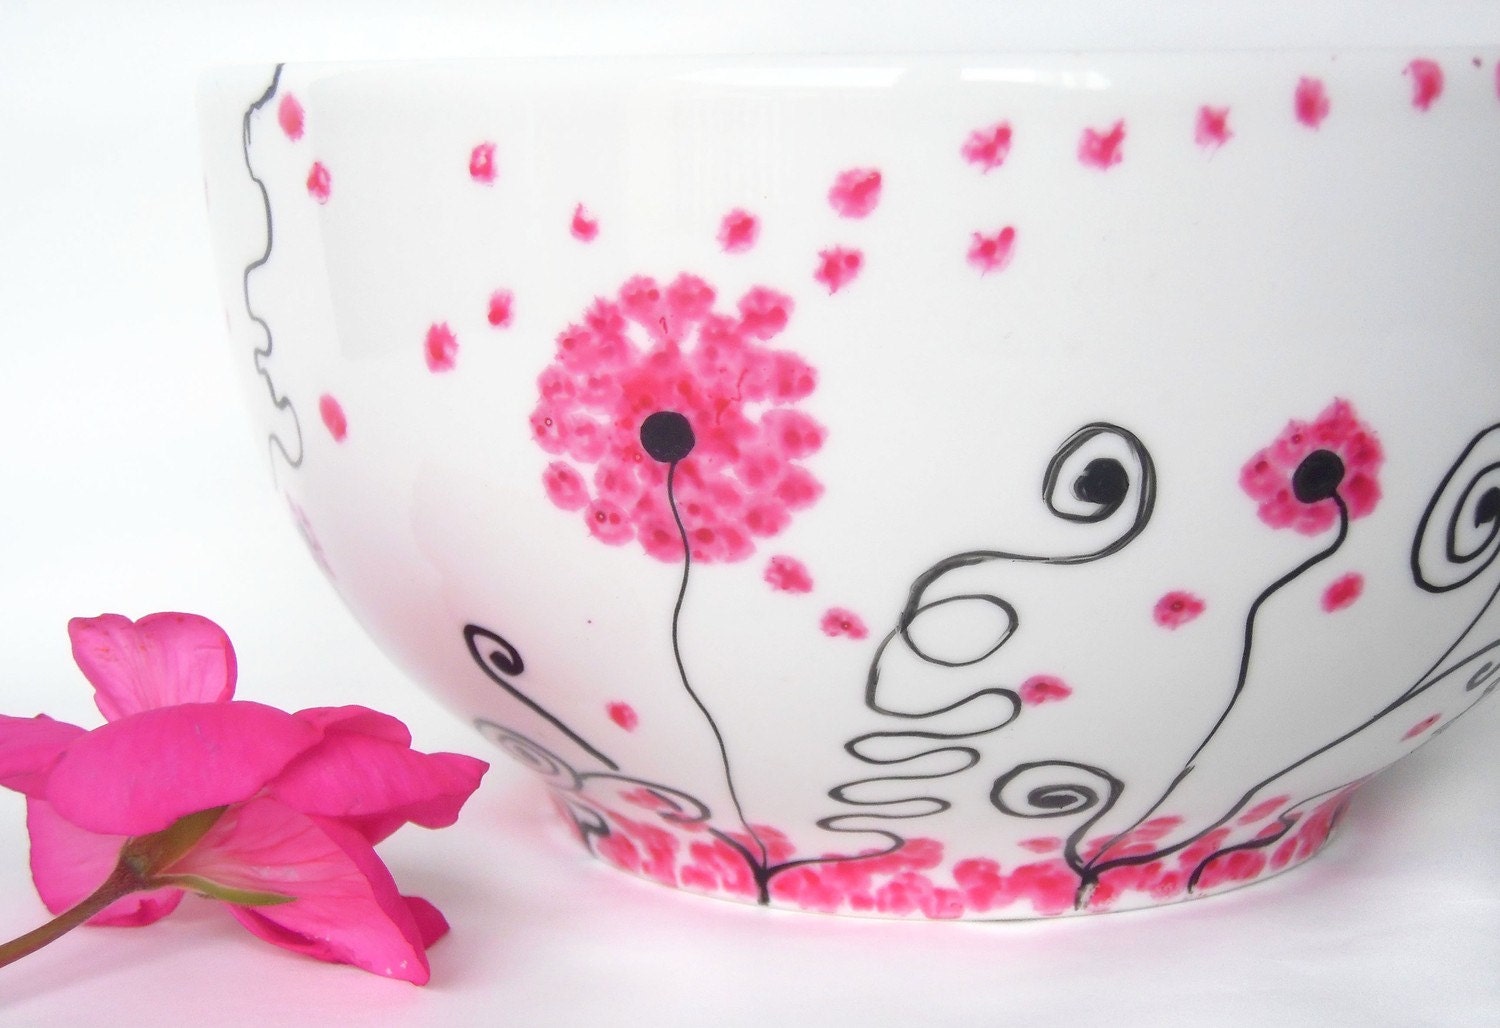 Hand painted breakfast bowl Rosy dandelion in pink, black and white flowers